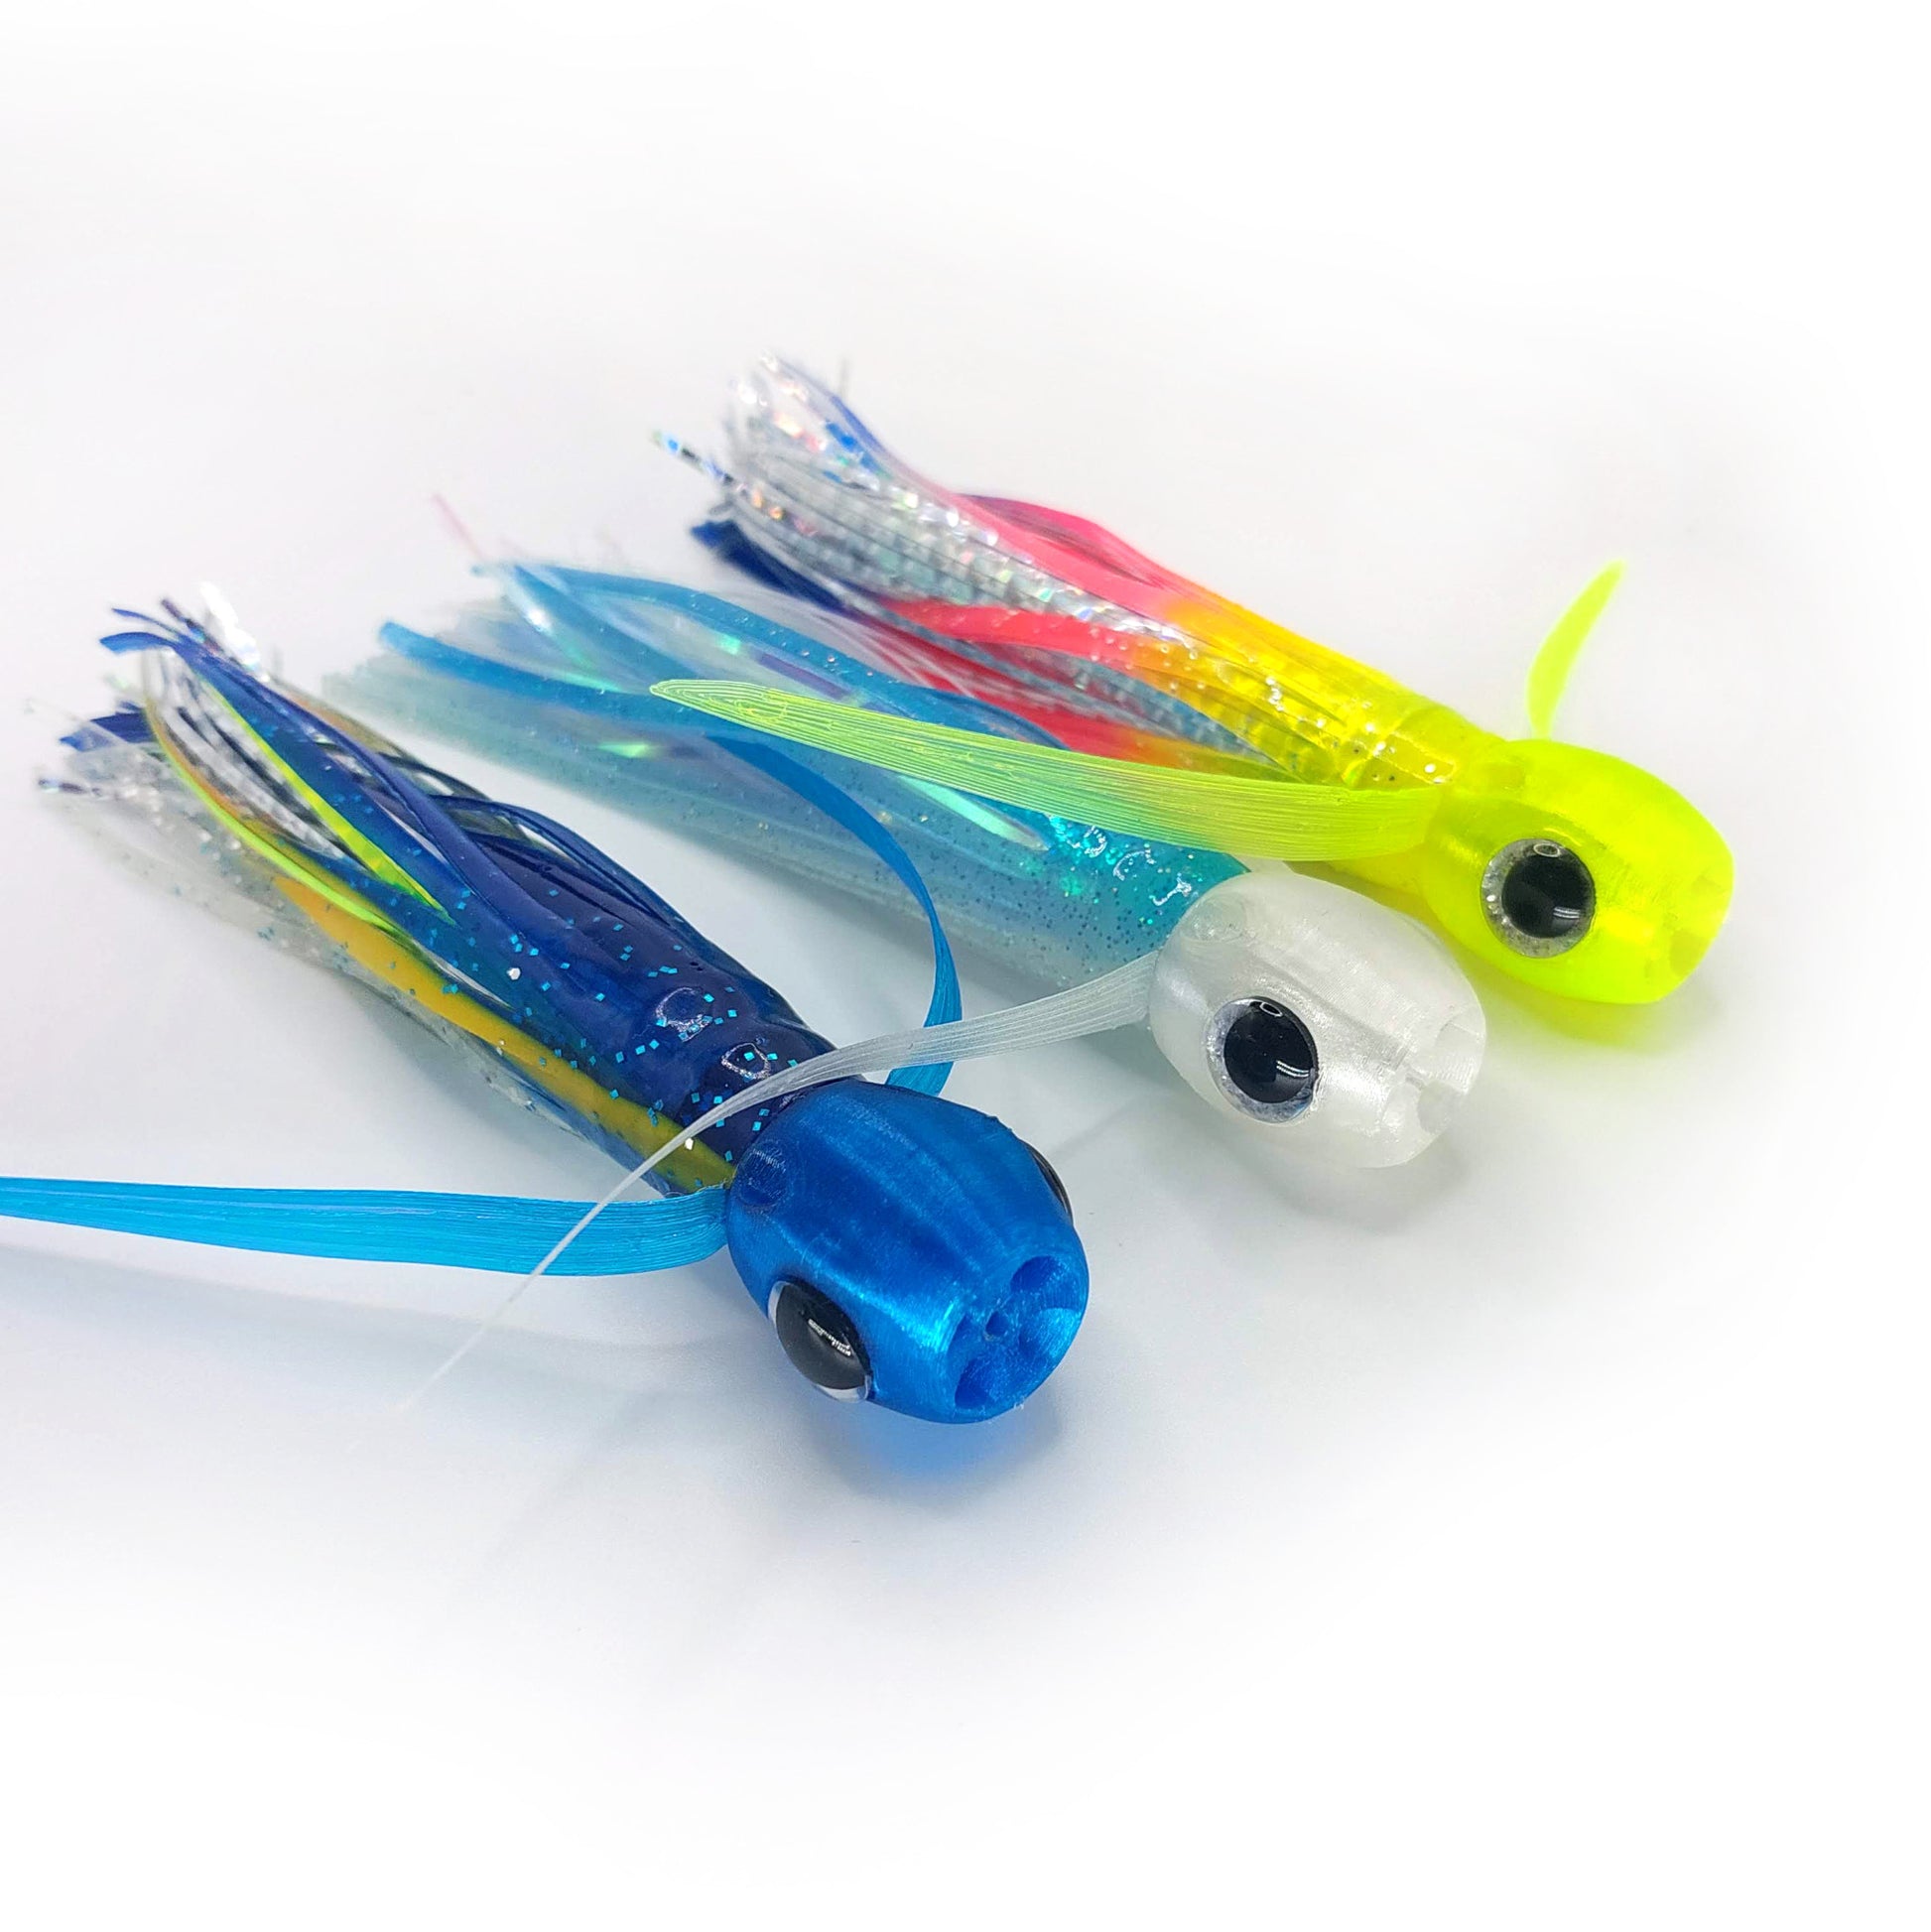 Cyclops GoggleEye 6" Saltwater Offshore Trolling Lures 3 Pack - Evolution Lures